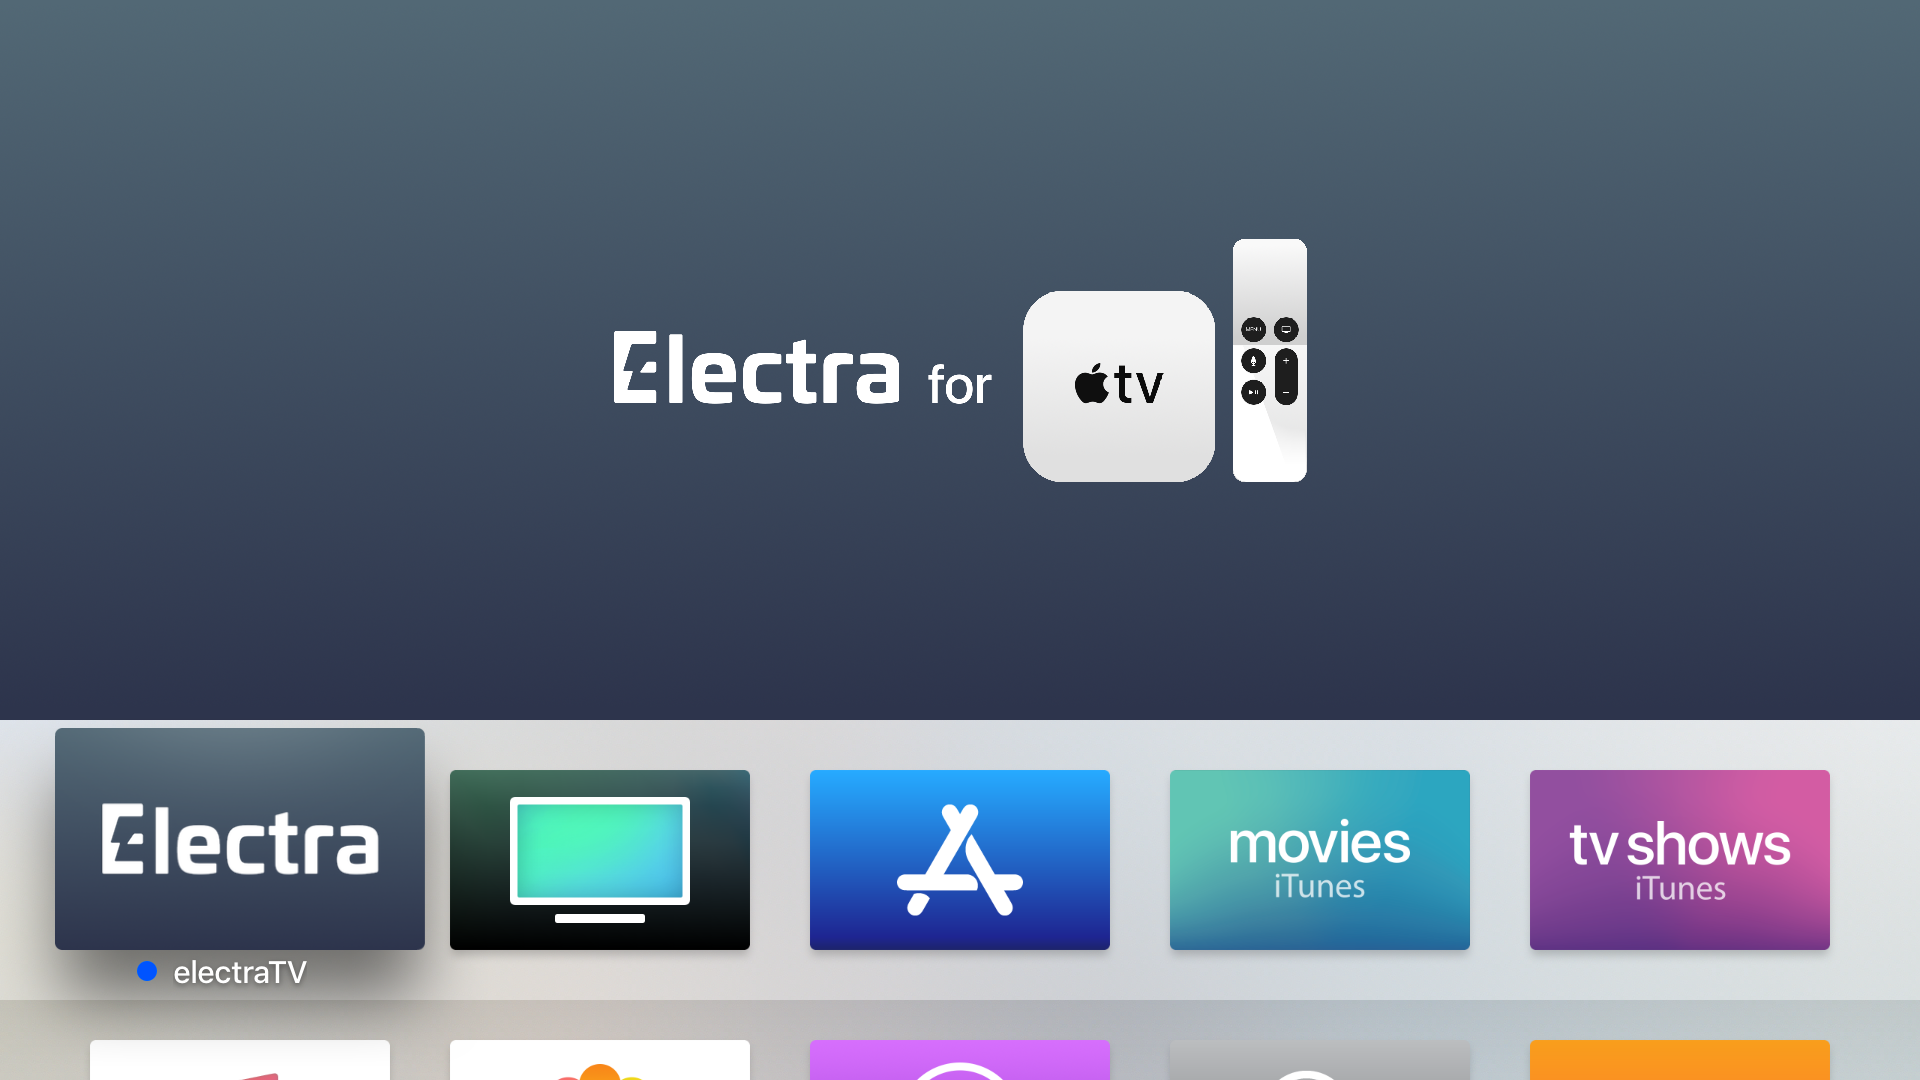 How to jailbreak Electra on Apple TV with tvOS 11.2-11.3